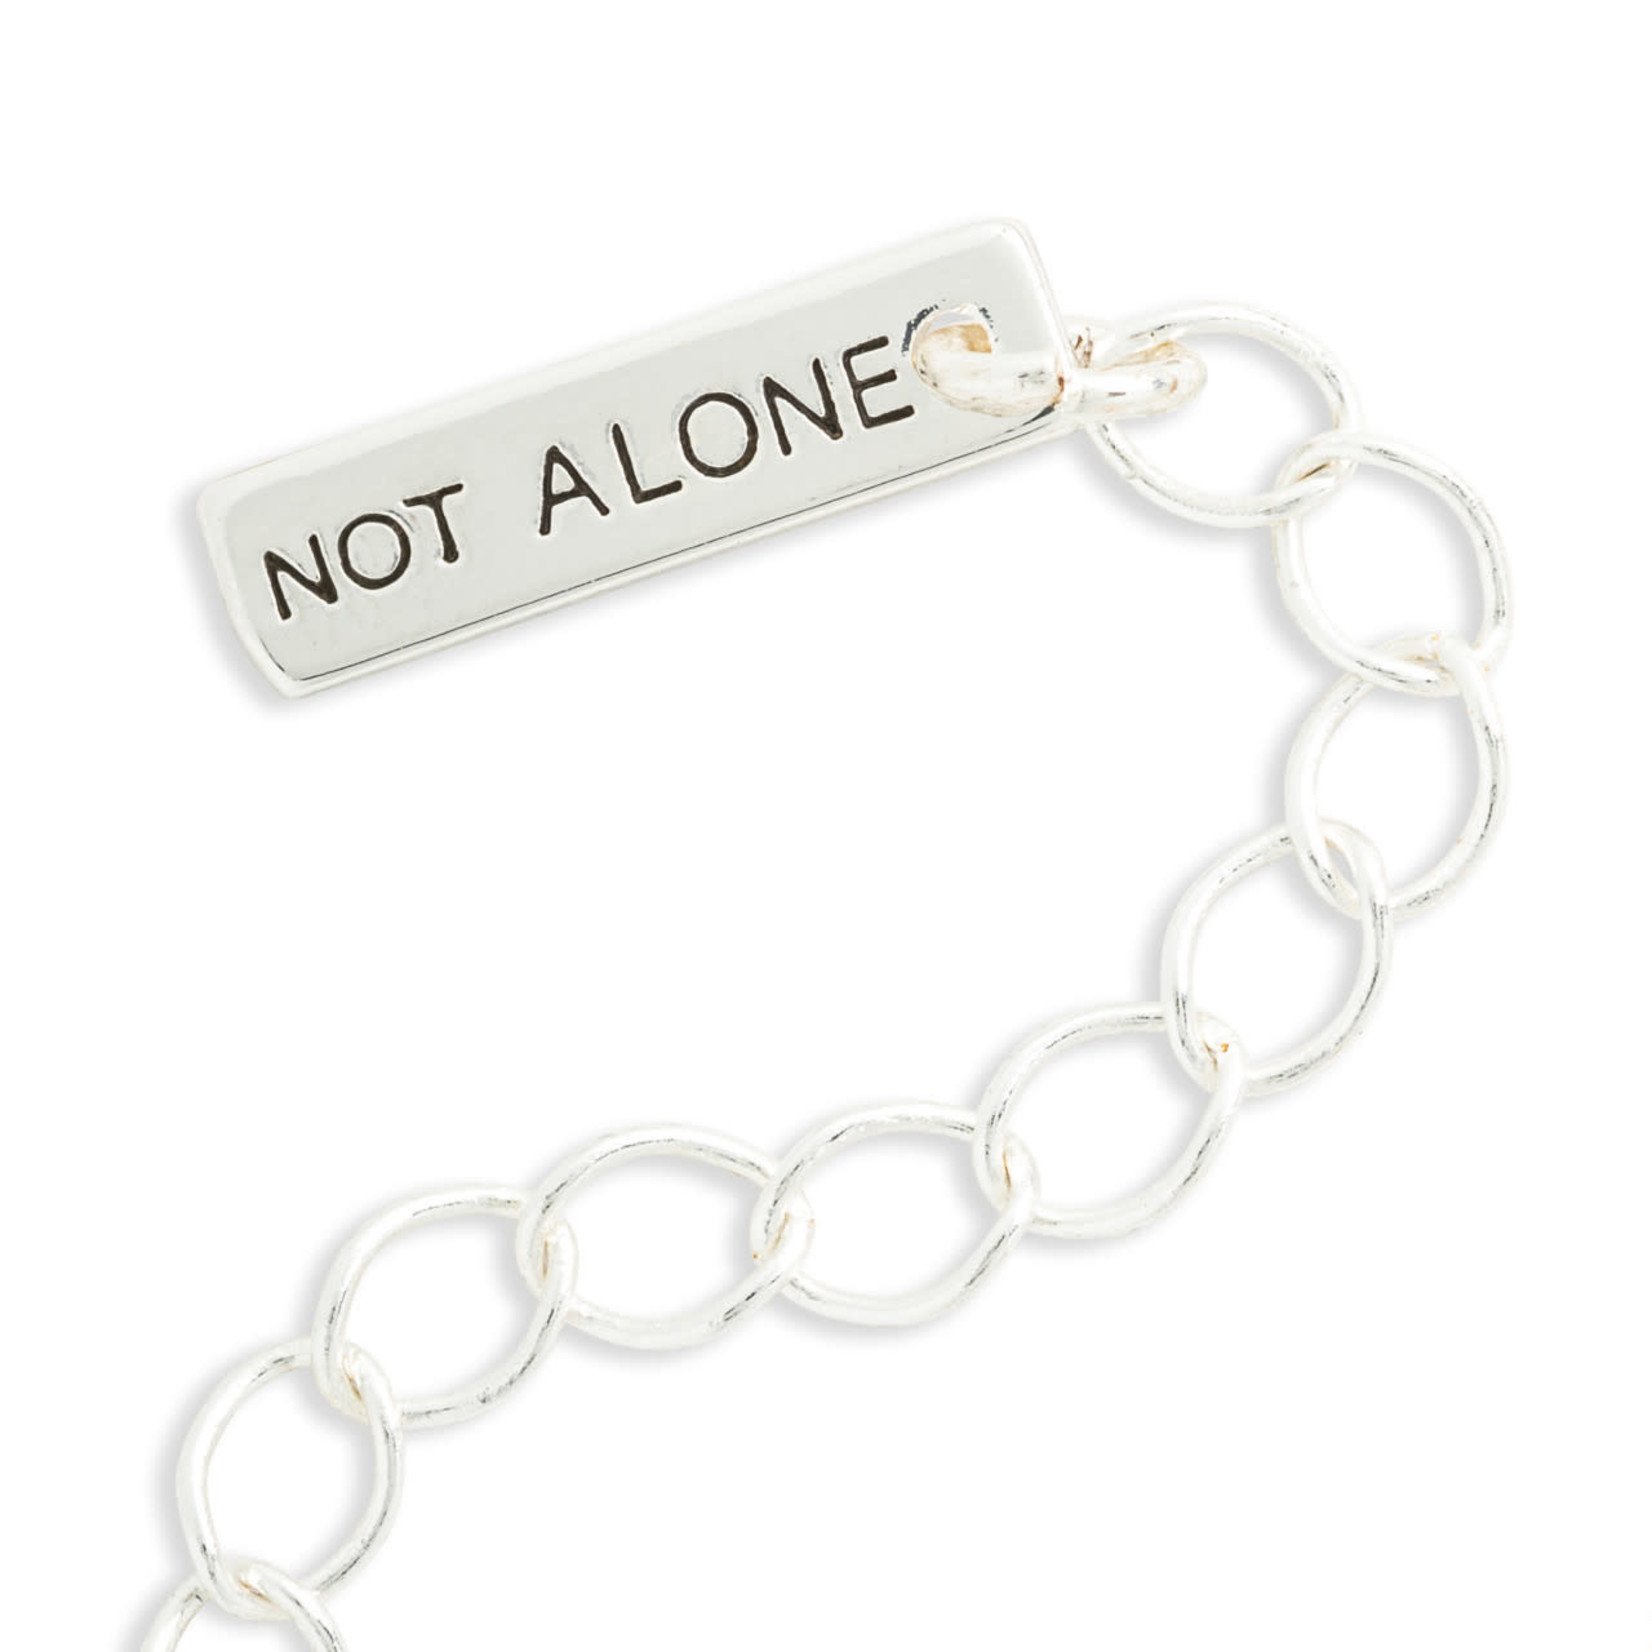 MORSE CODE NECKLACE - YOU'RE NOT ALONE